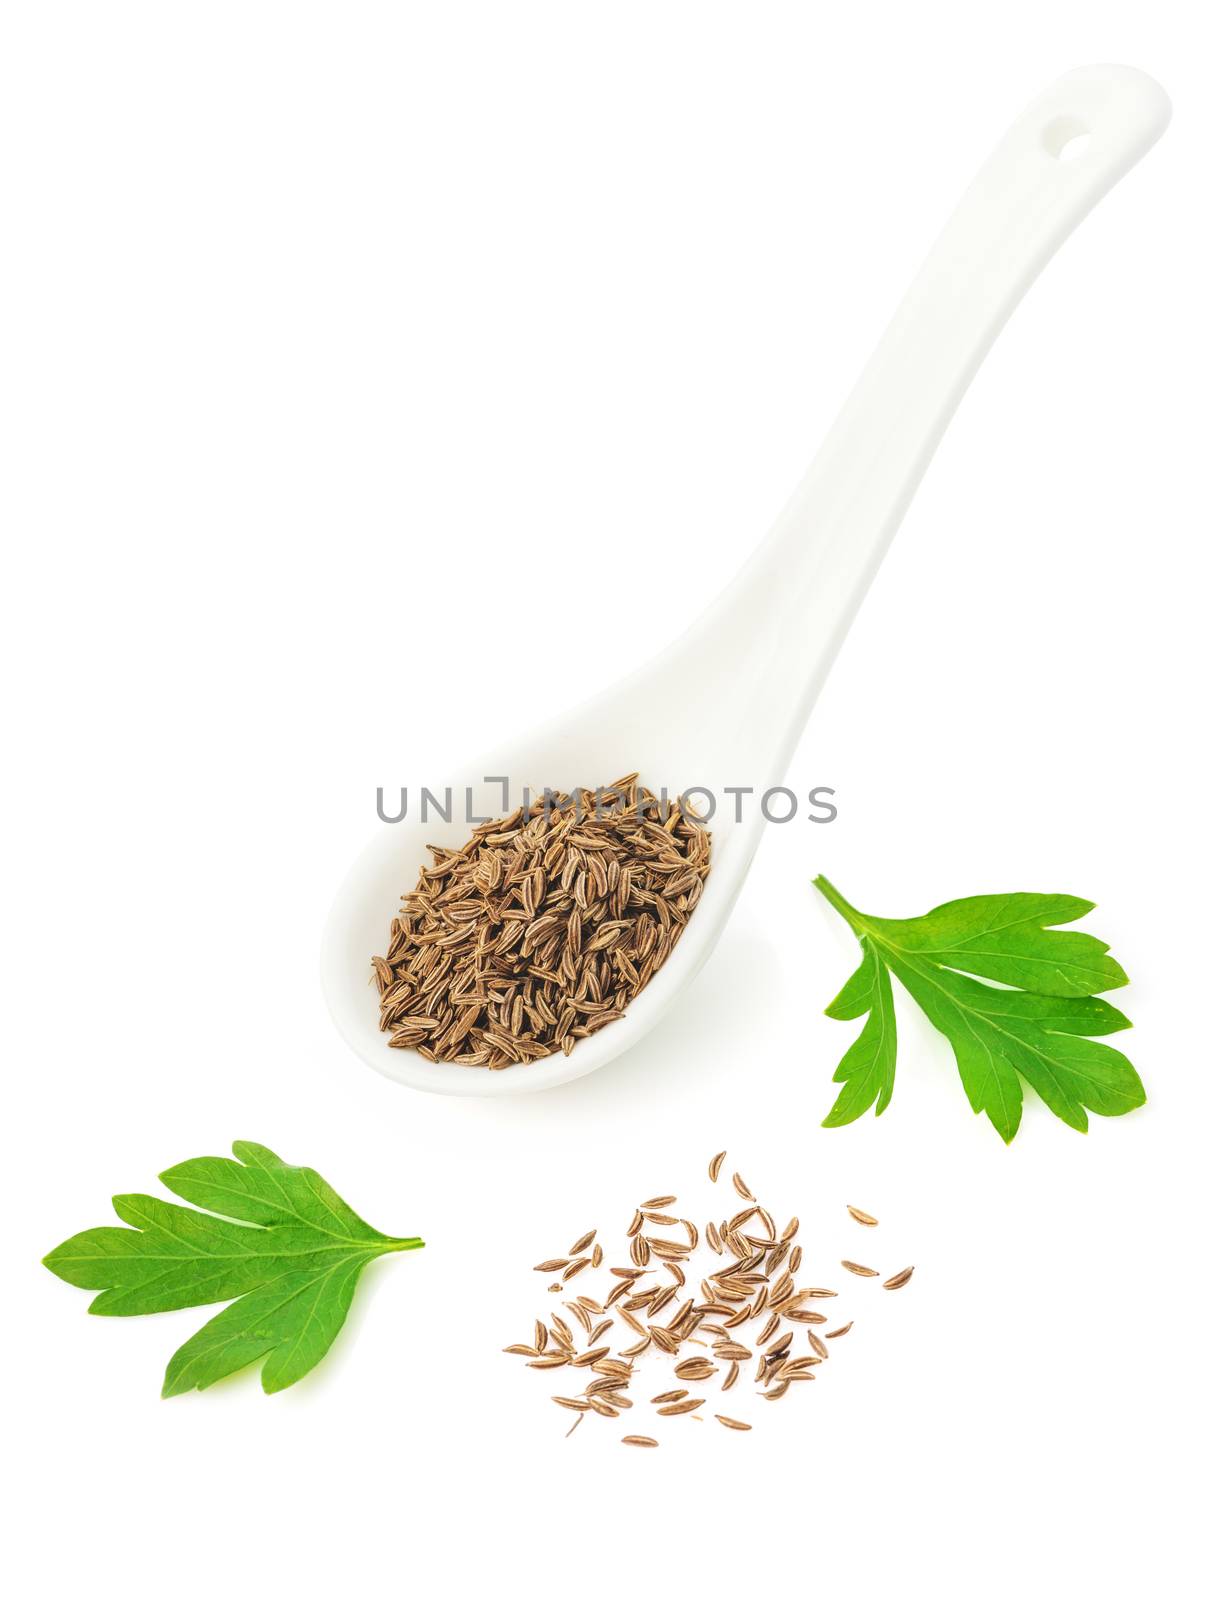 Dried seeds of cumin in a white ceramic spoon, parsley leaves isolated on white background